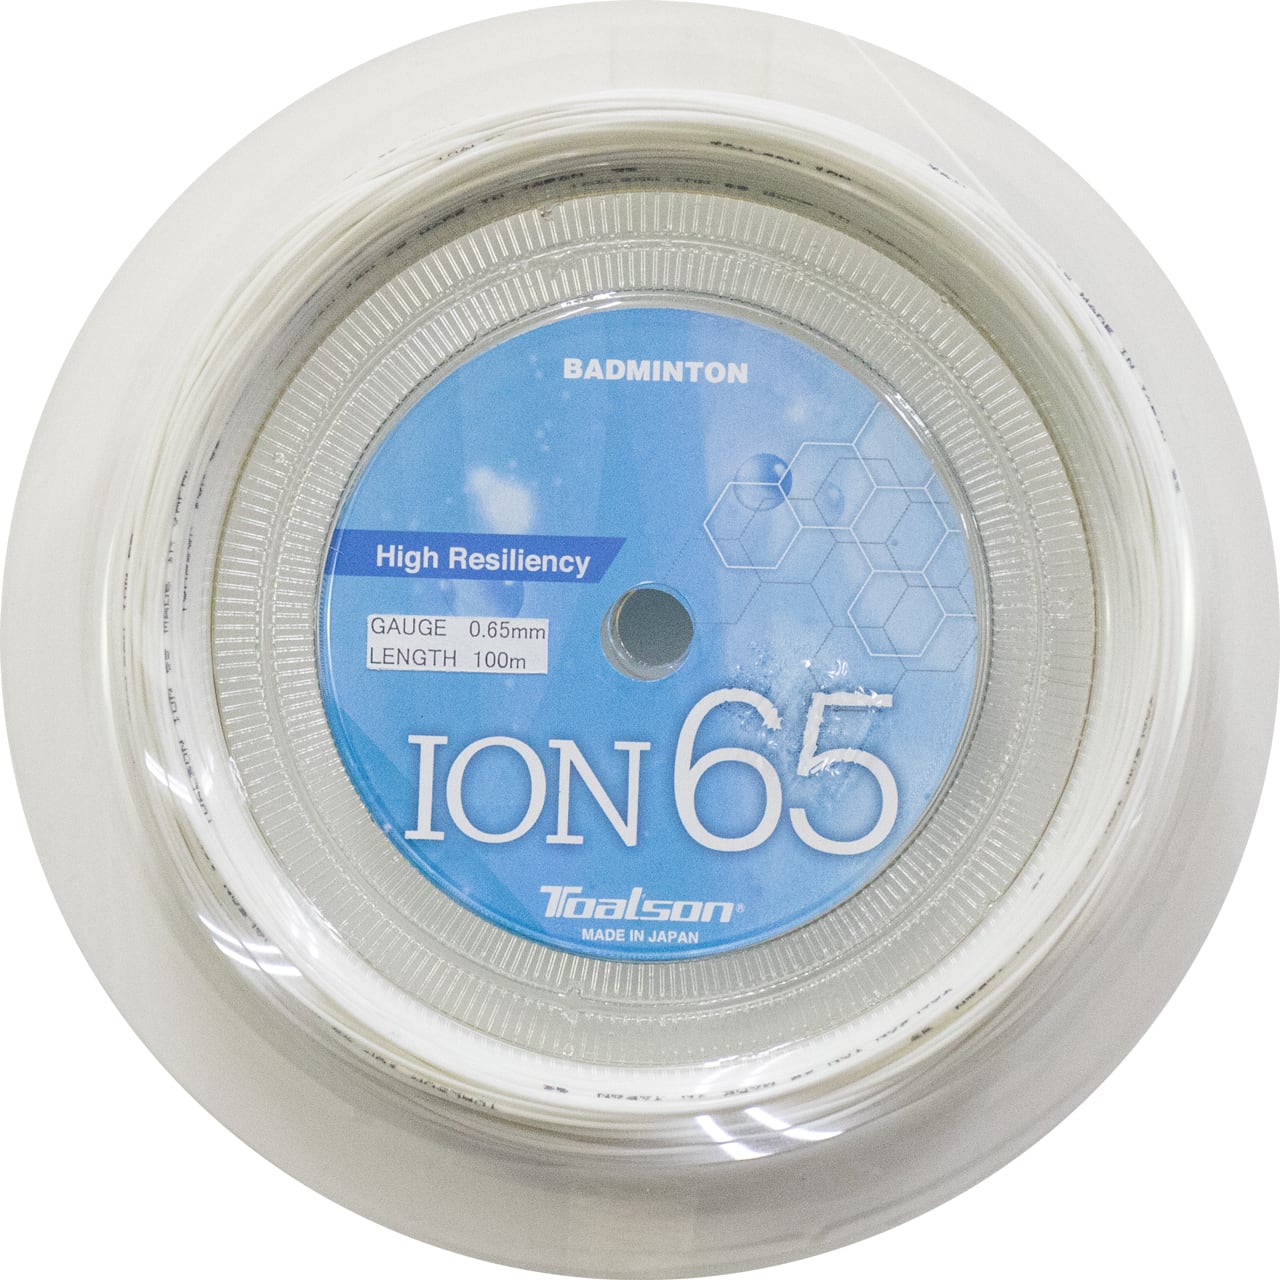 ION65 100Mロール【841651】/トアルソンTOALSON | トアルソン/Toalson OFFICIAL ONLINE SITE  (ローチェ/roche)